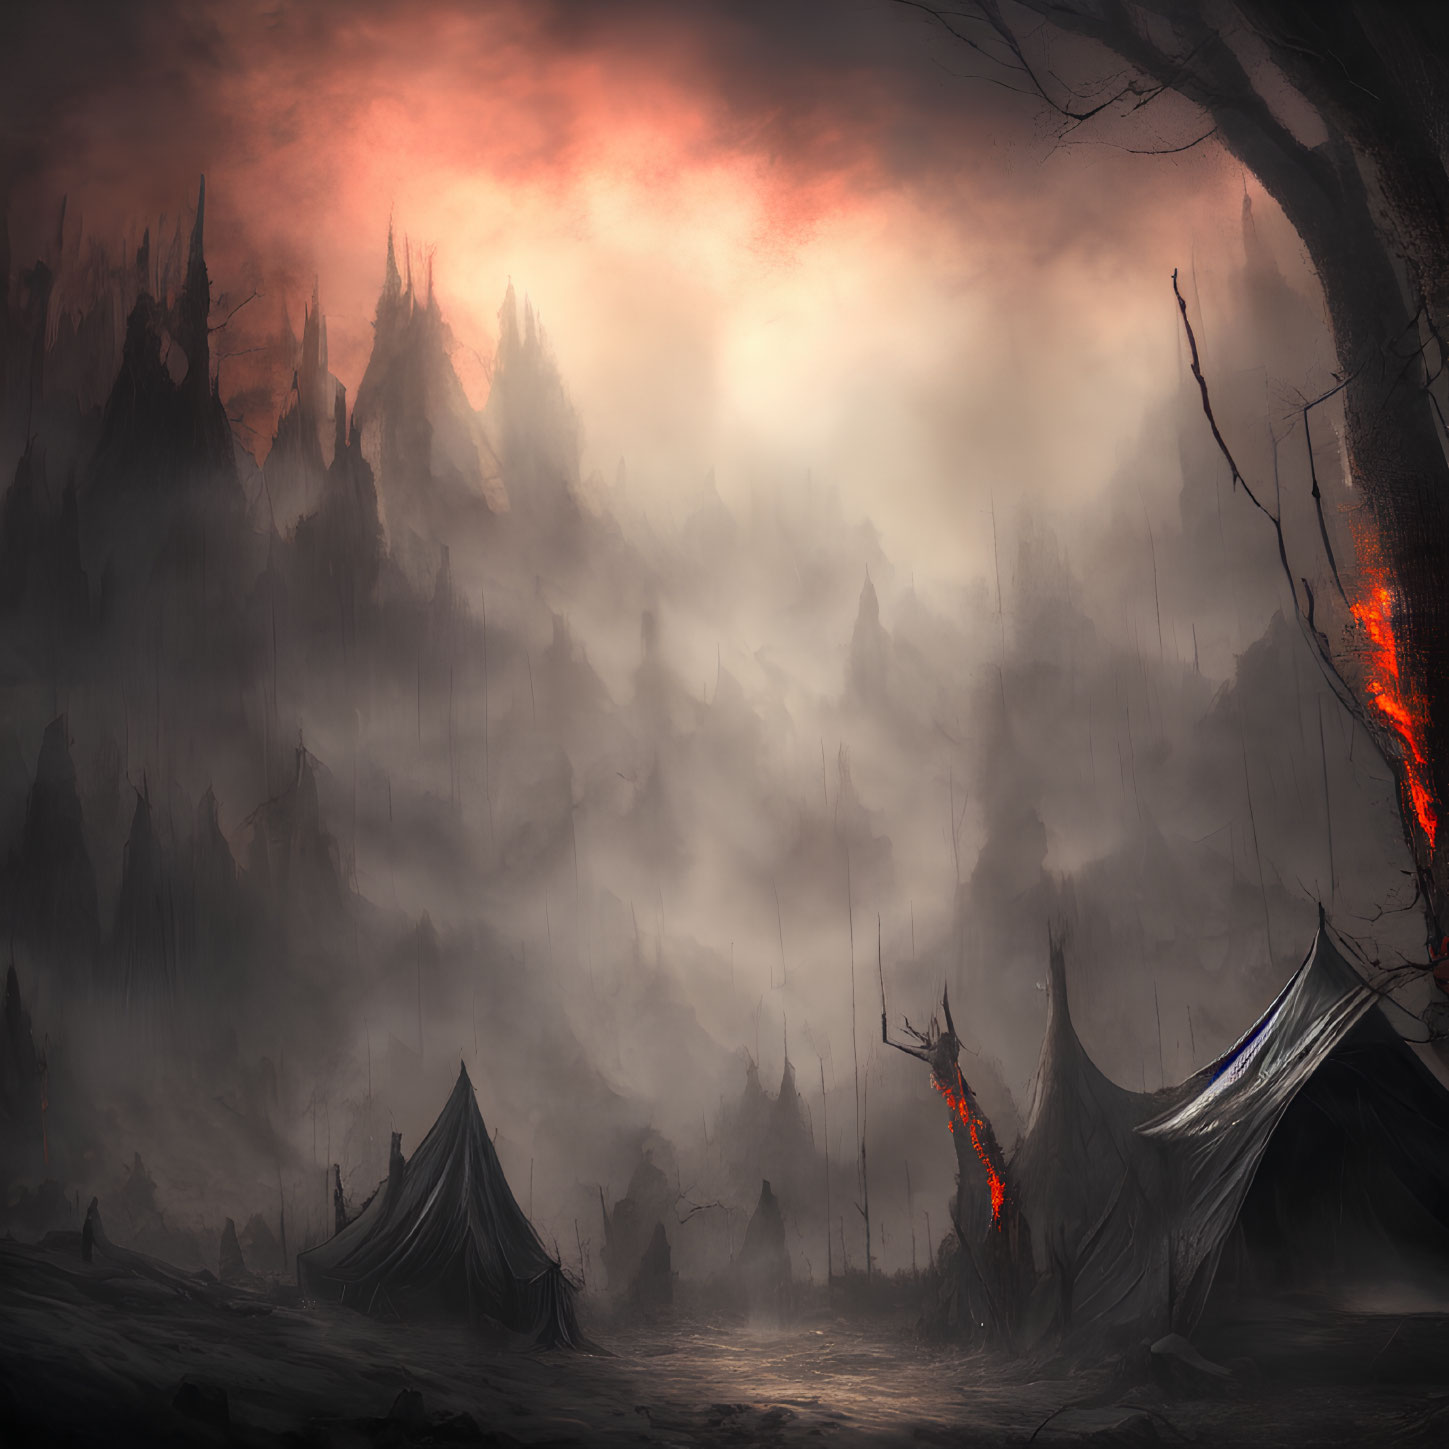 Dark Fantasy Landscape with Ominous Mountains and Red Sky